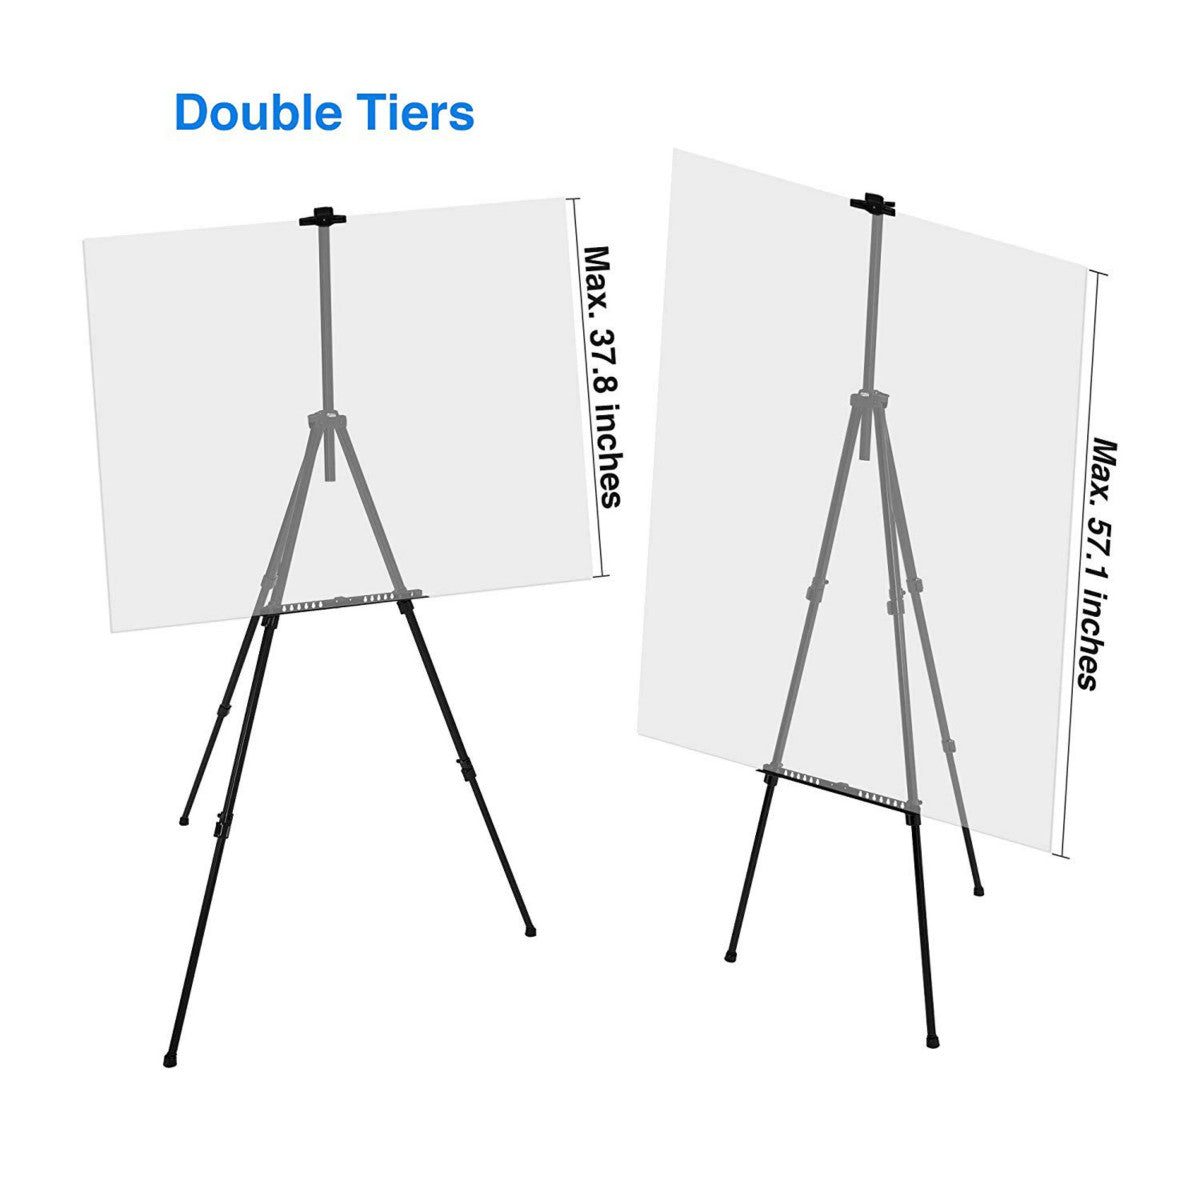  Artify 61 Inches Painting Easel Stand, Adjustable Height from  22-61”, Tripod for Painting and Display with a Carrying Bag, Aluminum,  1PACK, Black : Arts, Crafts & Sewing